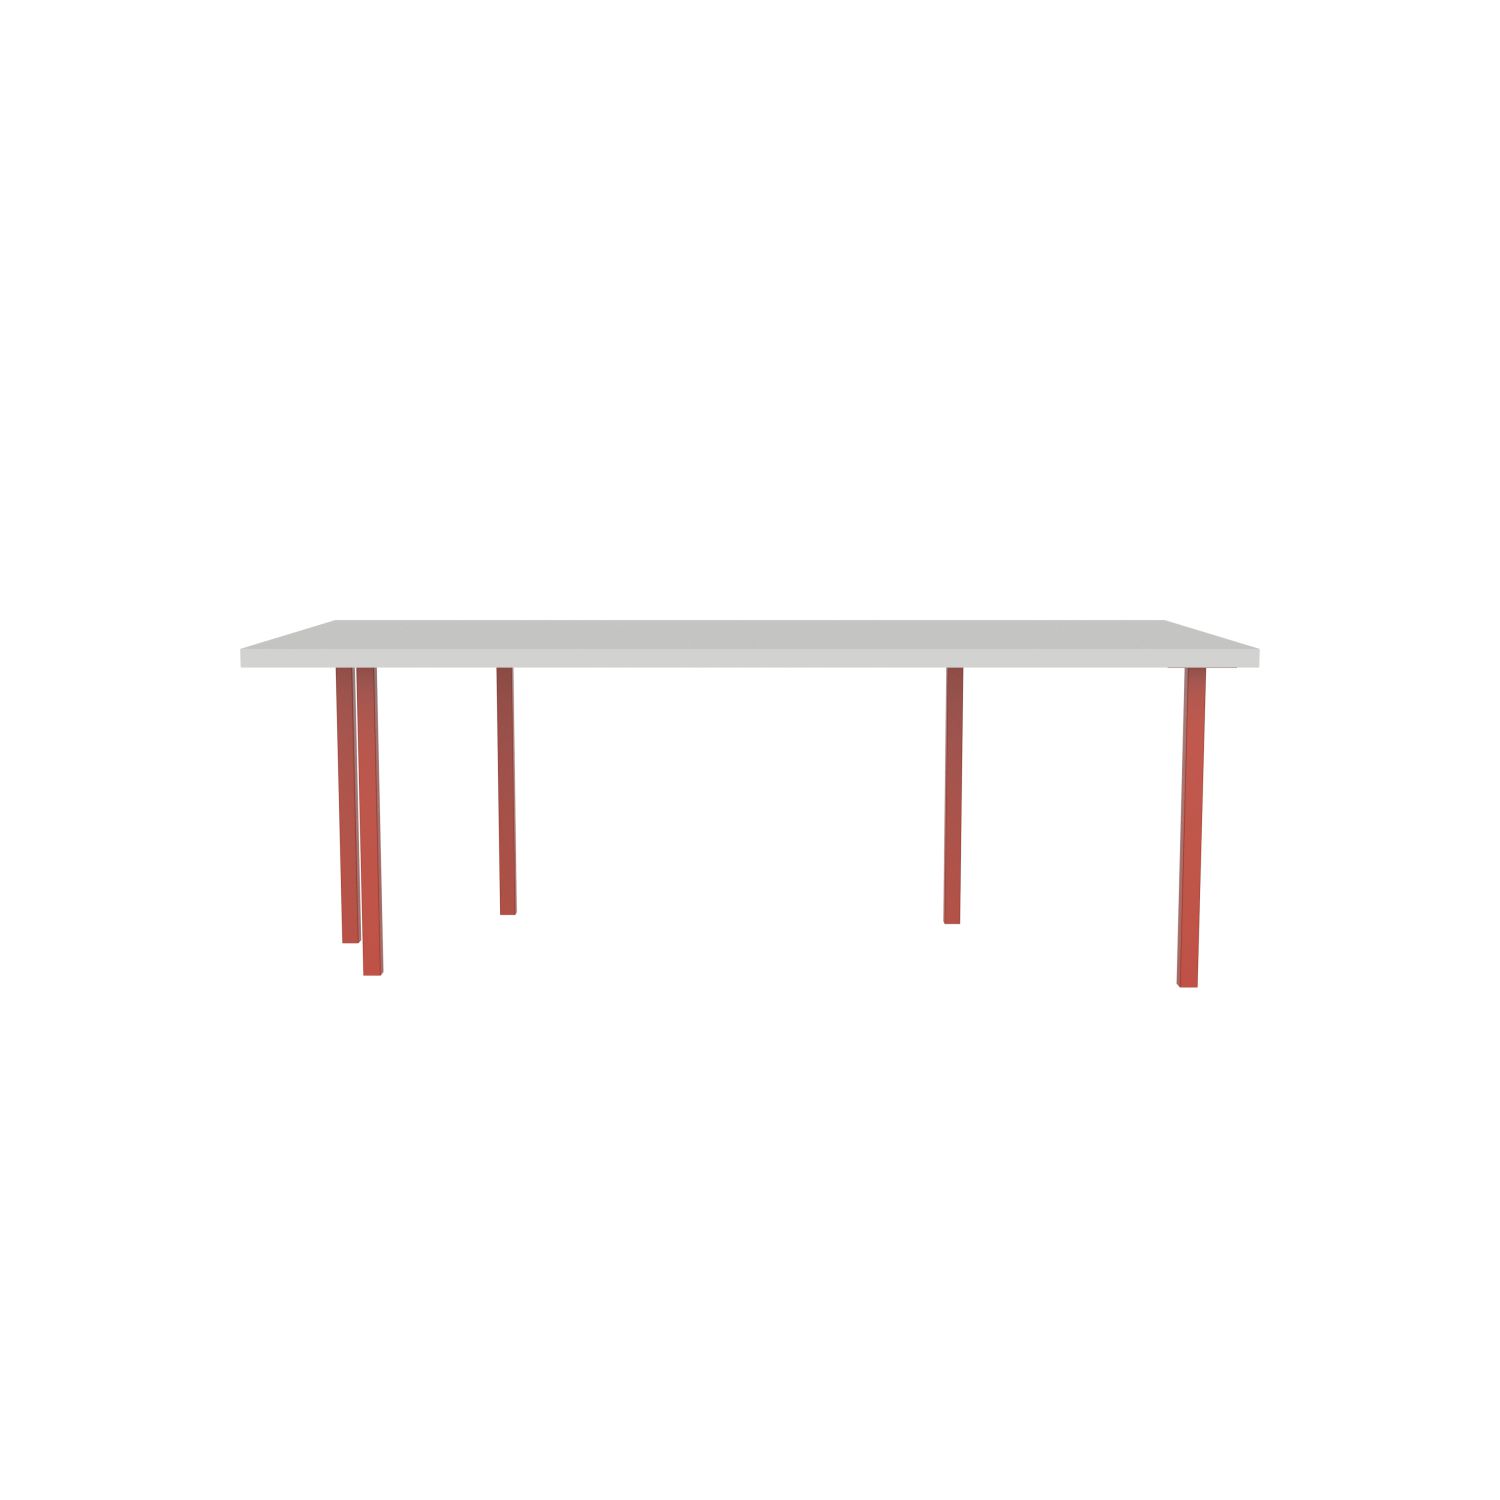 lensvelt bbrand table five fixed heigt 103x218 hpl boring grey 50 mm price level 1 vermilion red ral2002